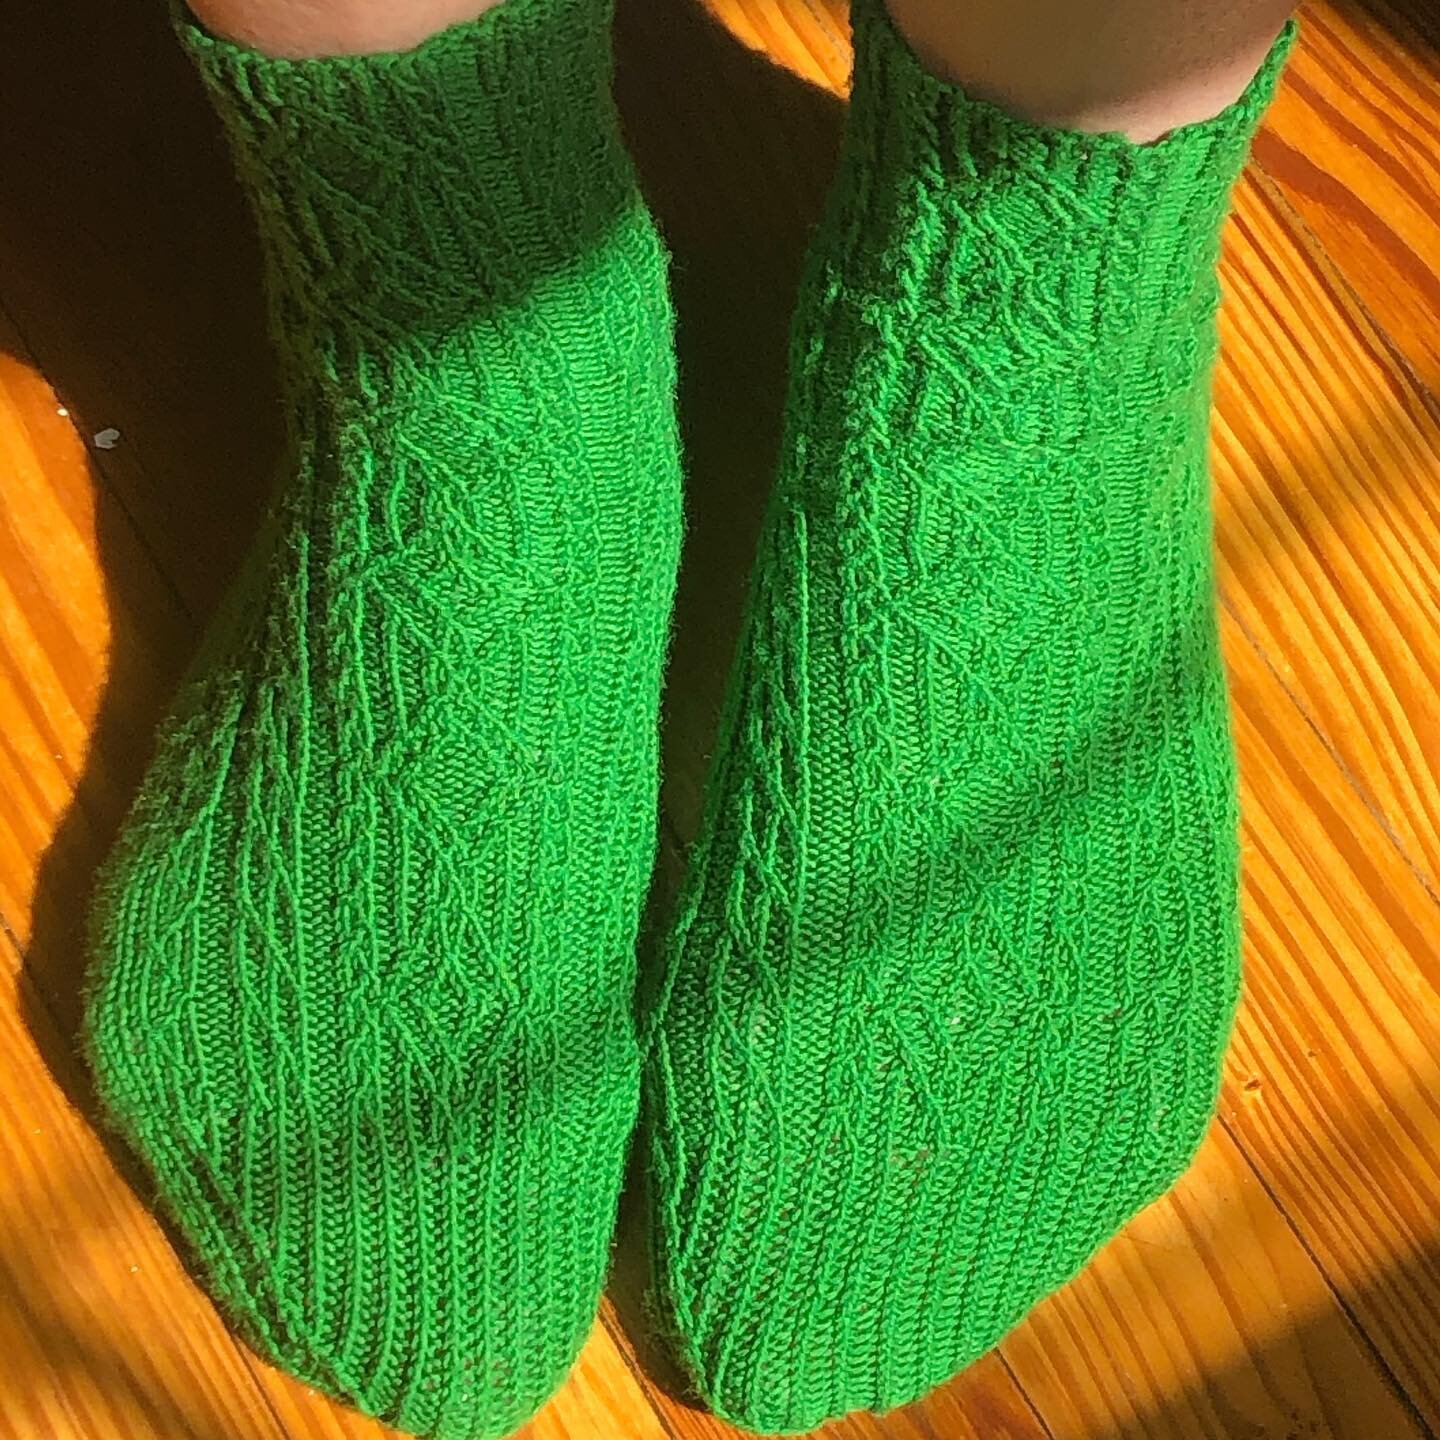 Finally finished Die Fledermaus socks with @rohrspatzundwollmeise Grunt so Gr&uuml;n. Wollmeise has the BEST stitch definition and with this pattern every other stitch is ktbl so I needed a great yarn! Come winter these will be one of my favorite pai